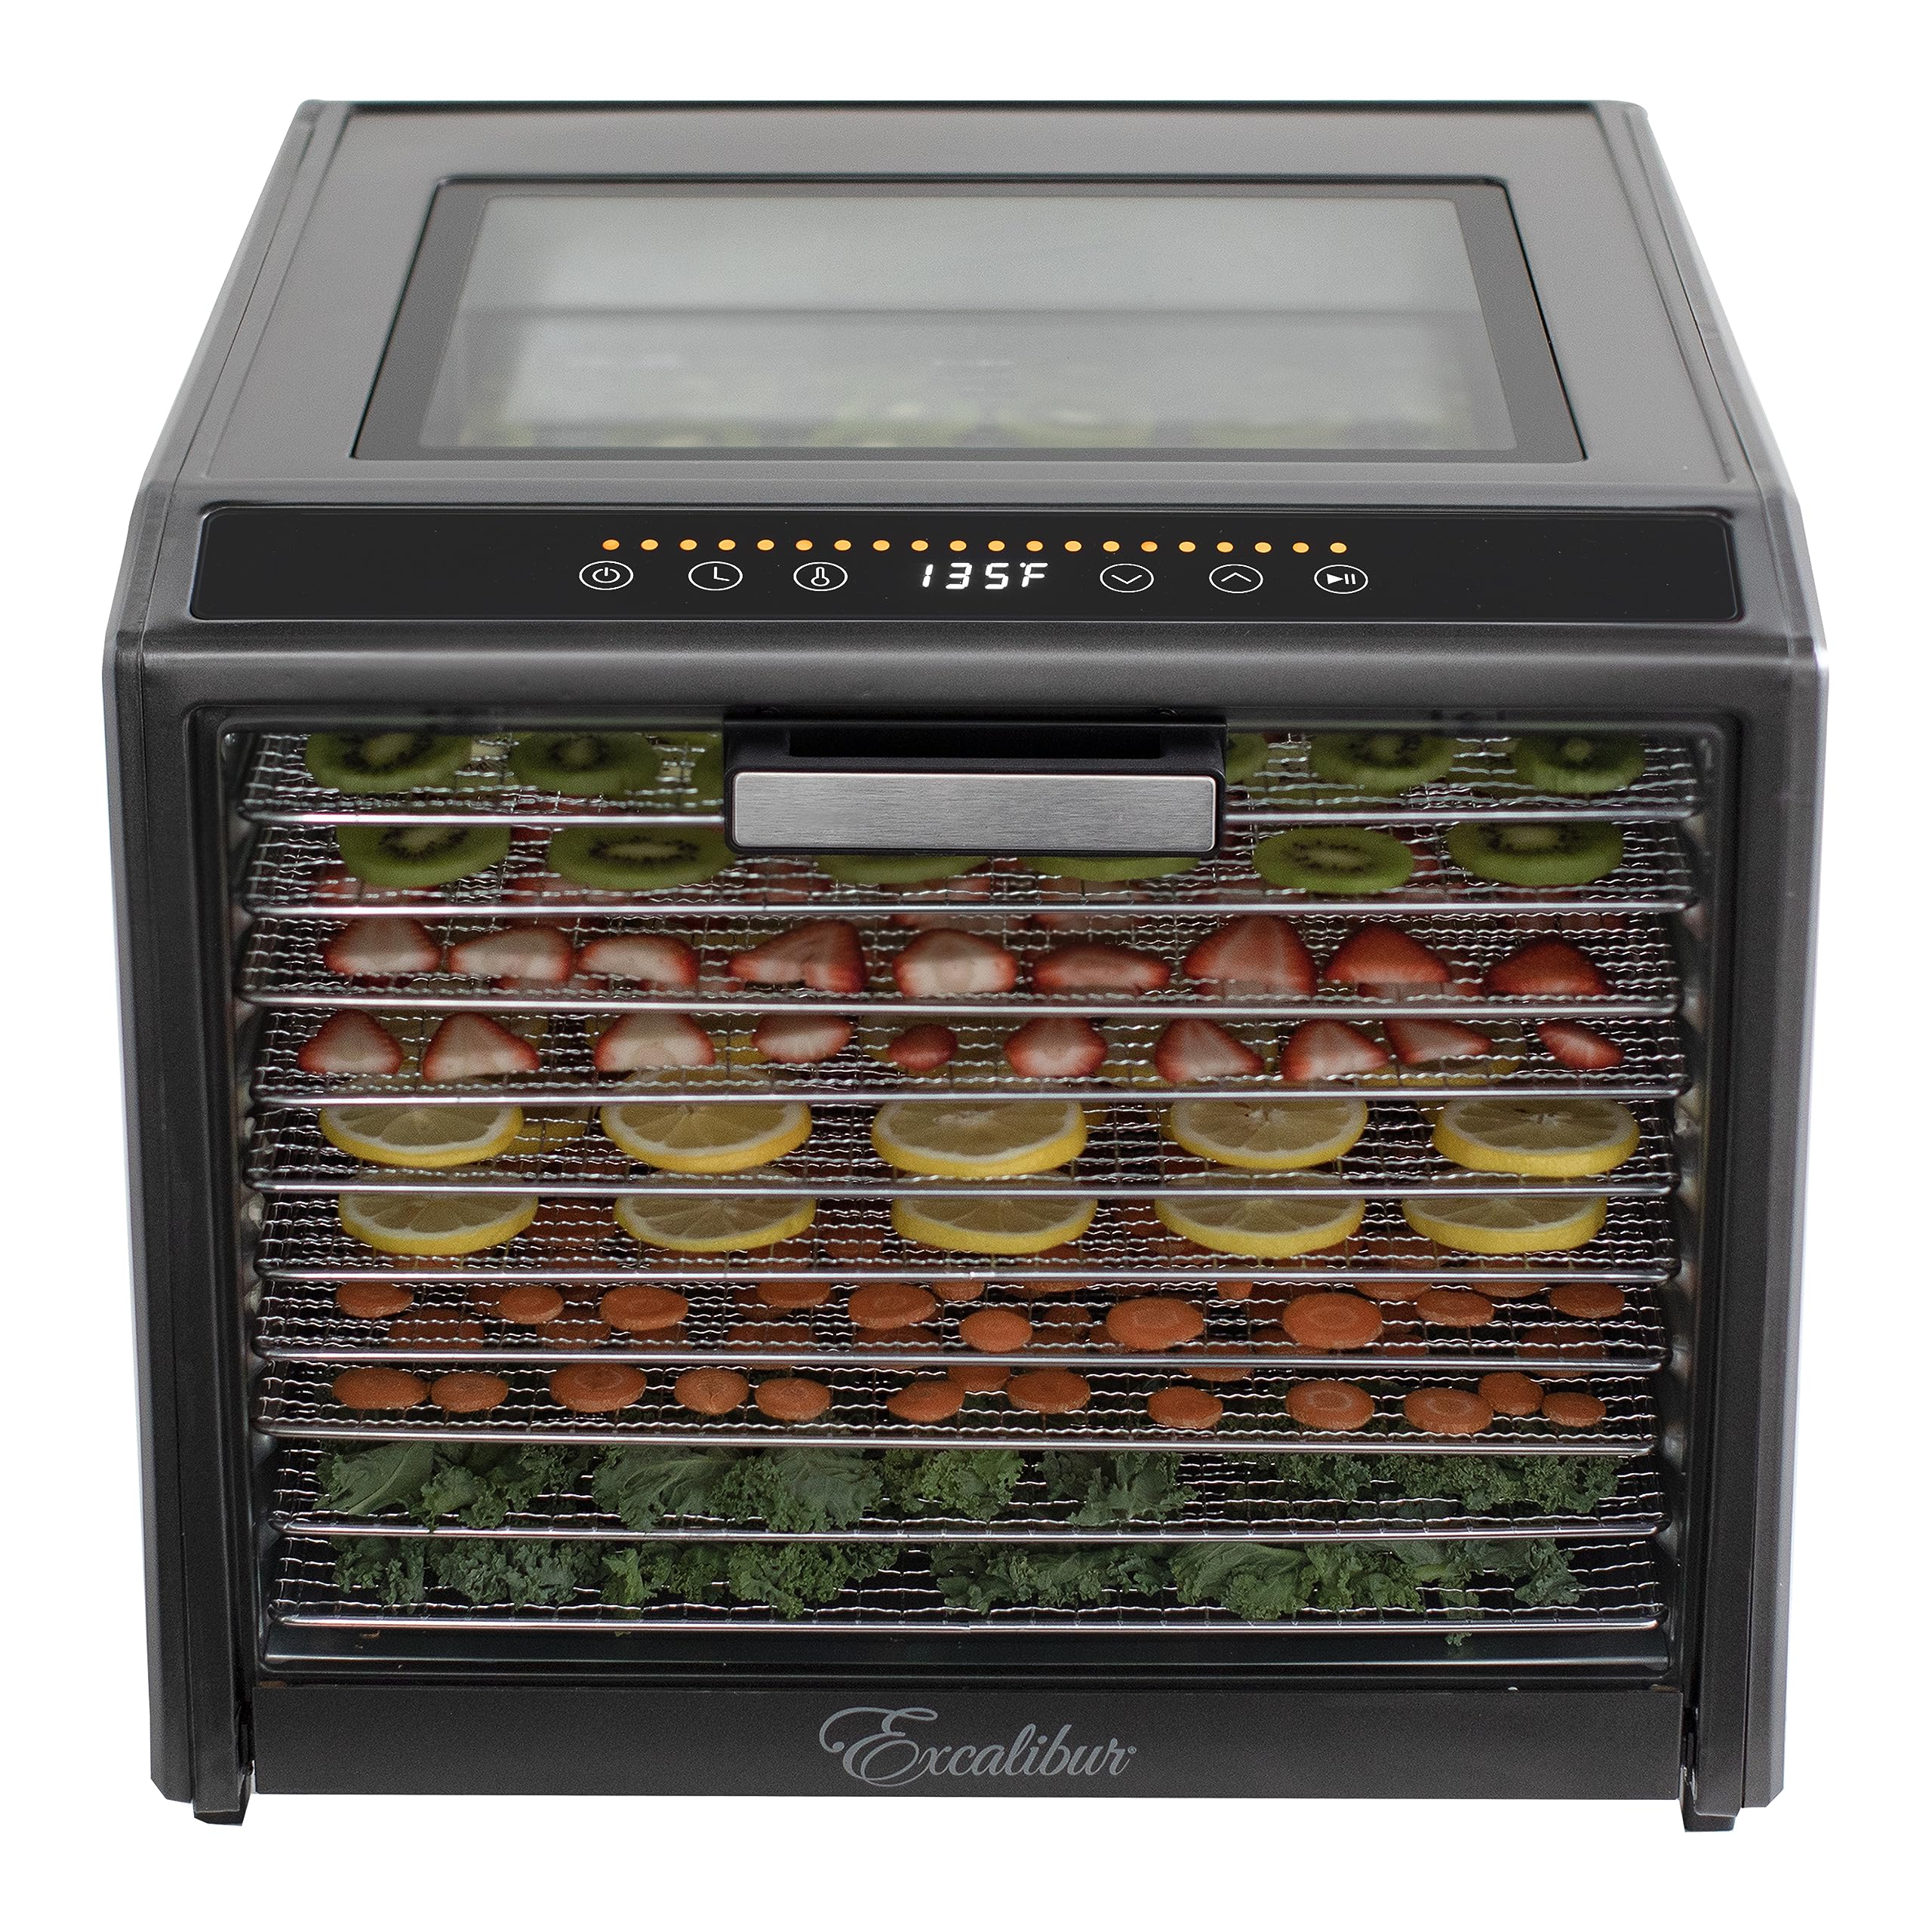 Excalibur Electric Food Dehydrator Performance Series 10-Tray with Adjustable Temperature Control Includes Stainless Steel Drying Trays Glass Door Top View Window and LED Display Progress Bar, Black